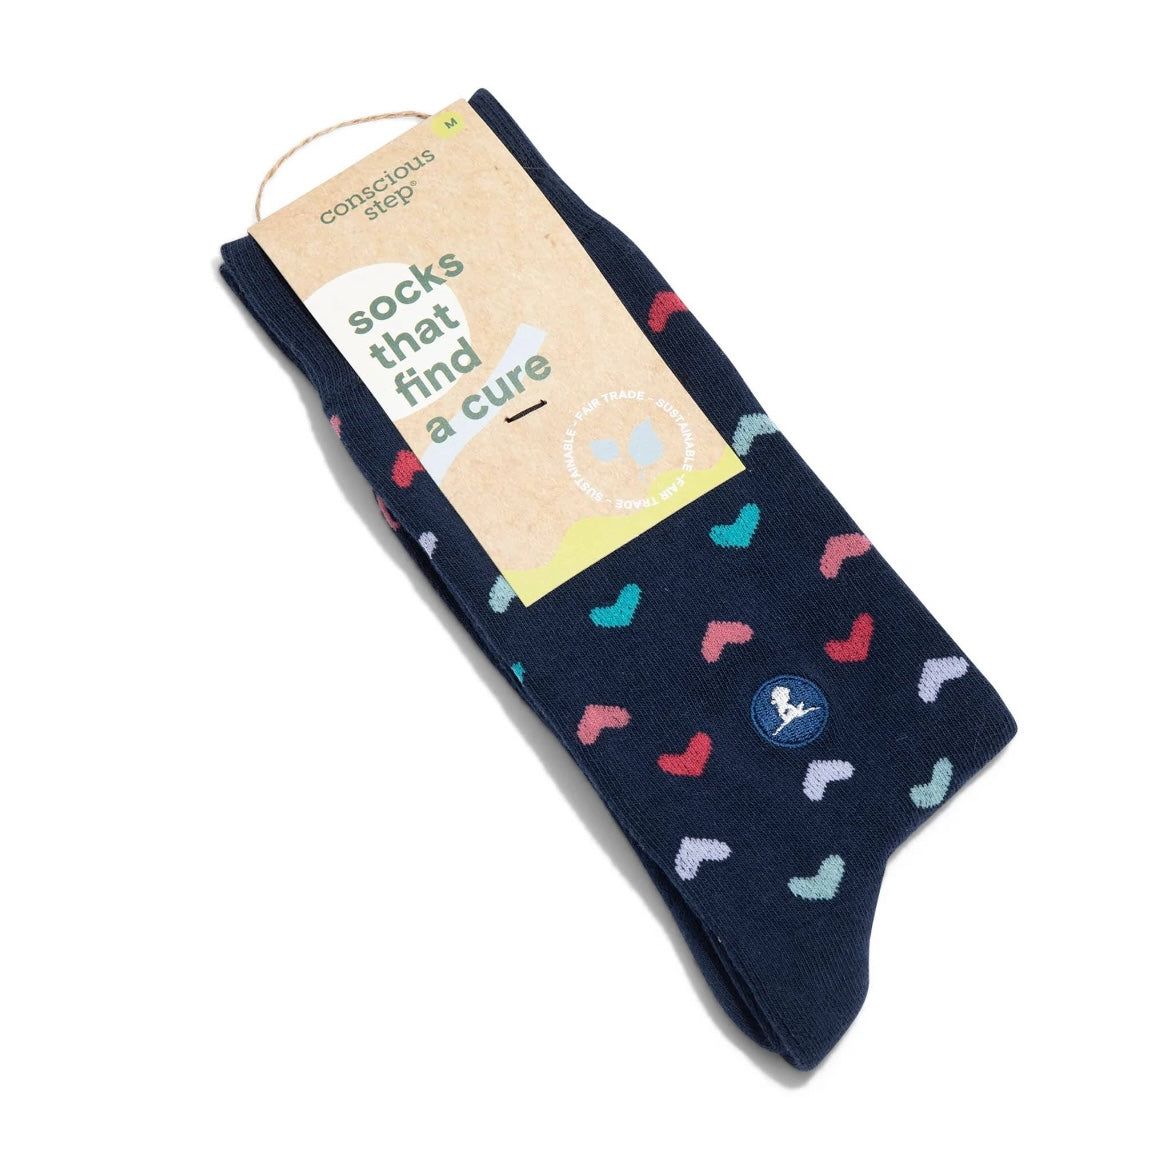 Socks that Find a Cure (Hearts)